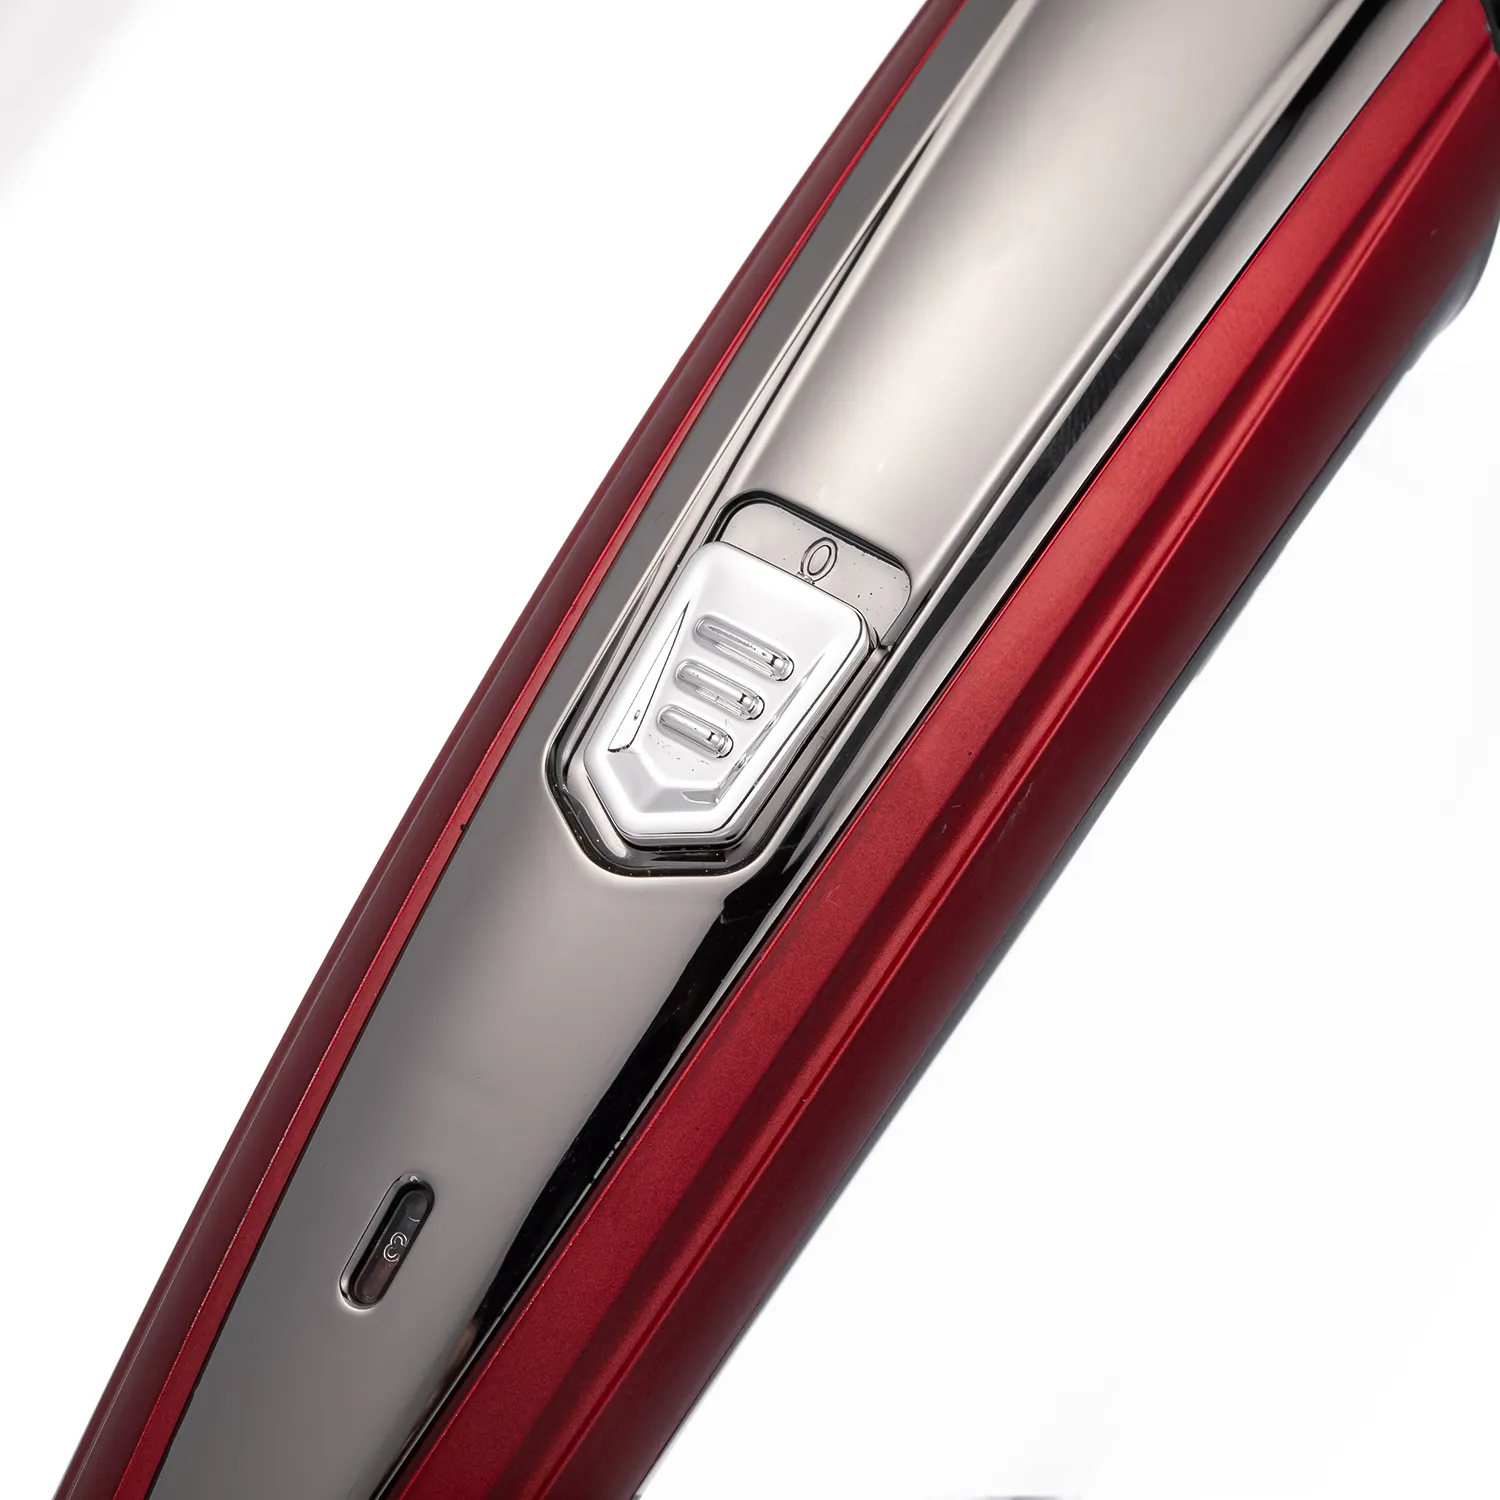 YOKO YK-7205 High Quality USB Barber Waterproof Cordless Electric Cordless Professional Hair Clippers